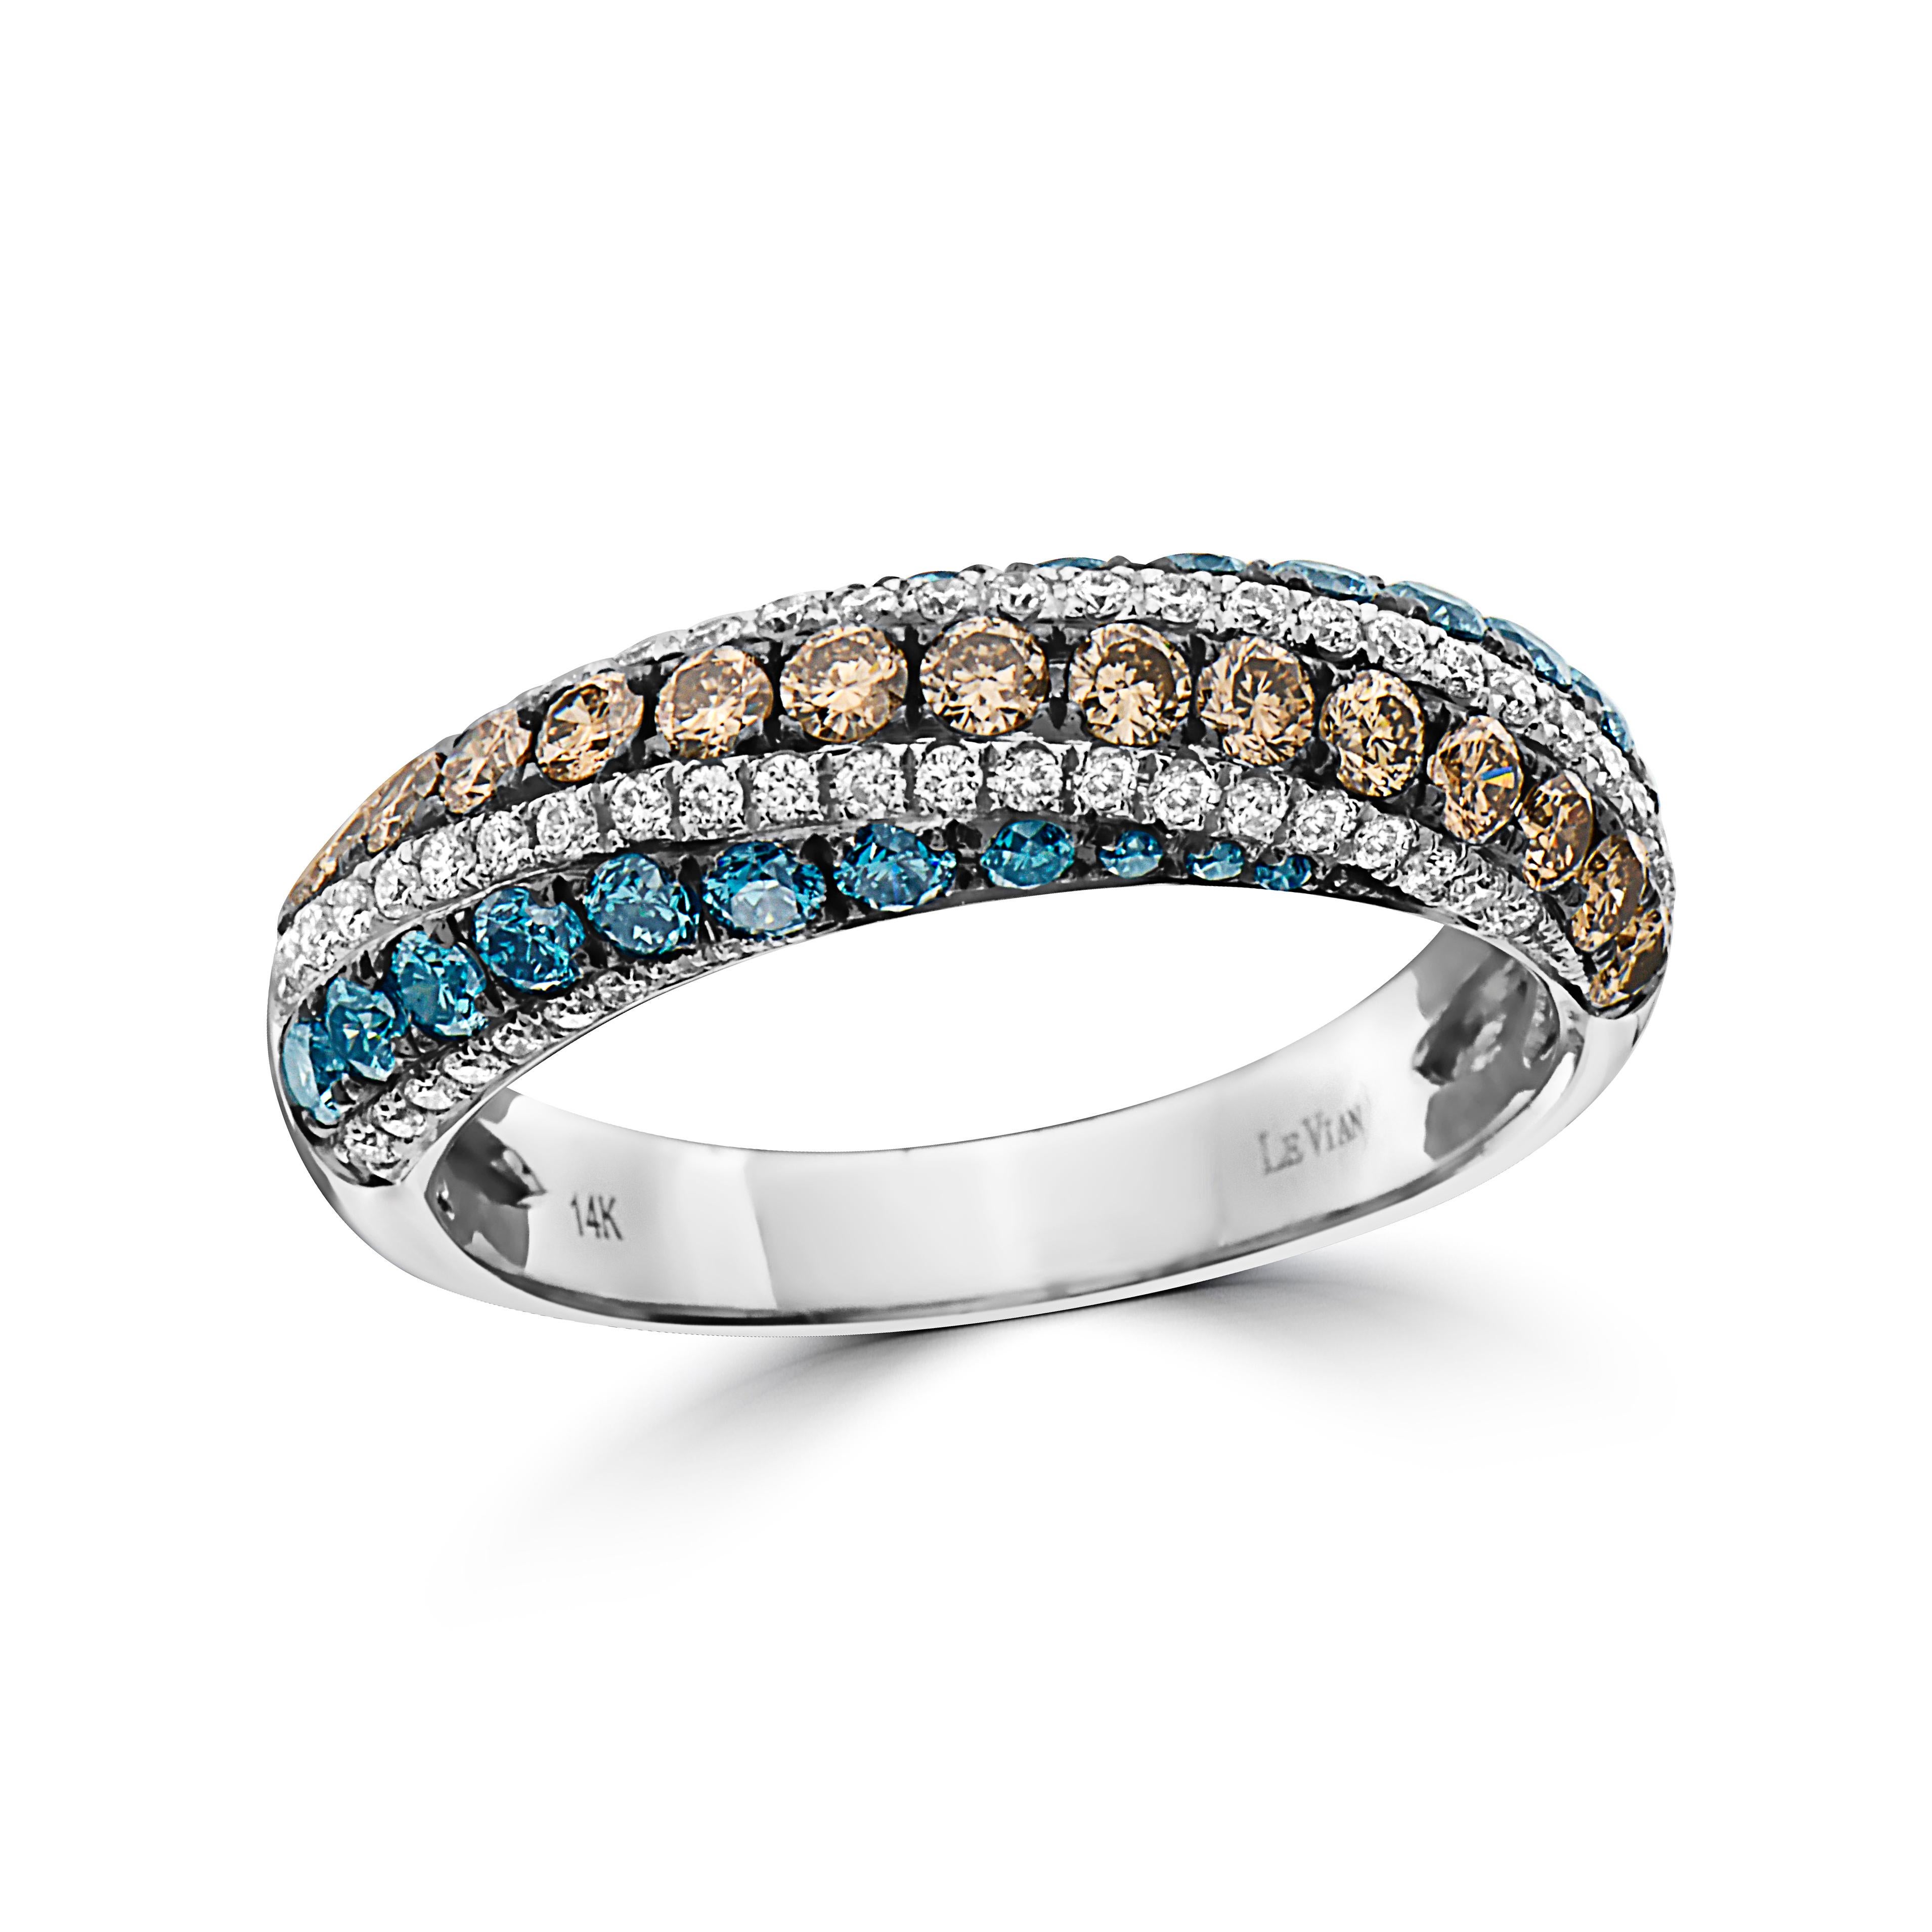 LeVian 14K White Gold Round Iced Blue Chocolate Brown Diamond Cocktail Ring
